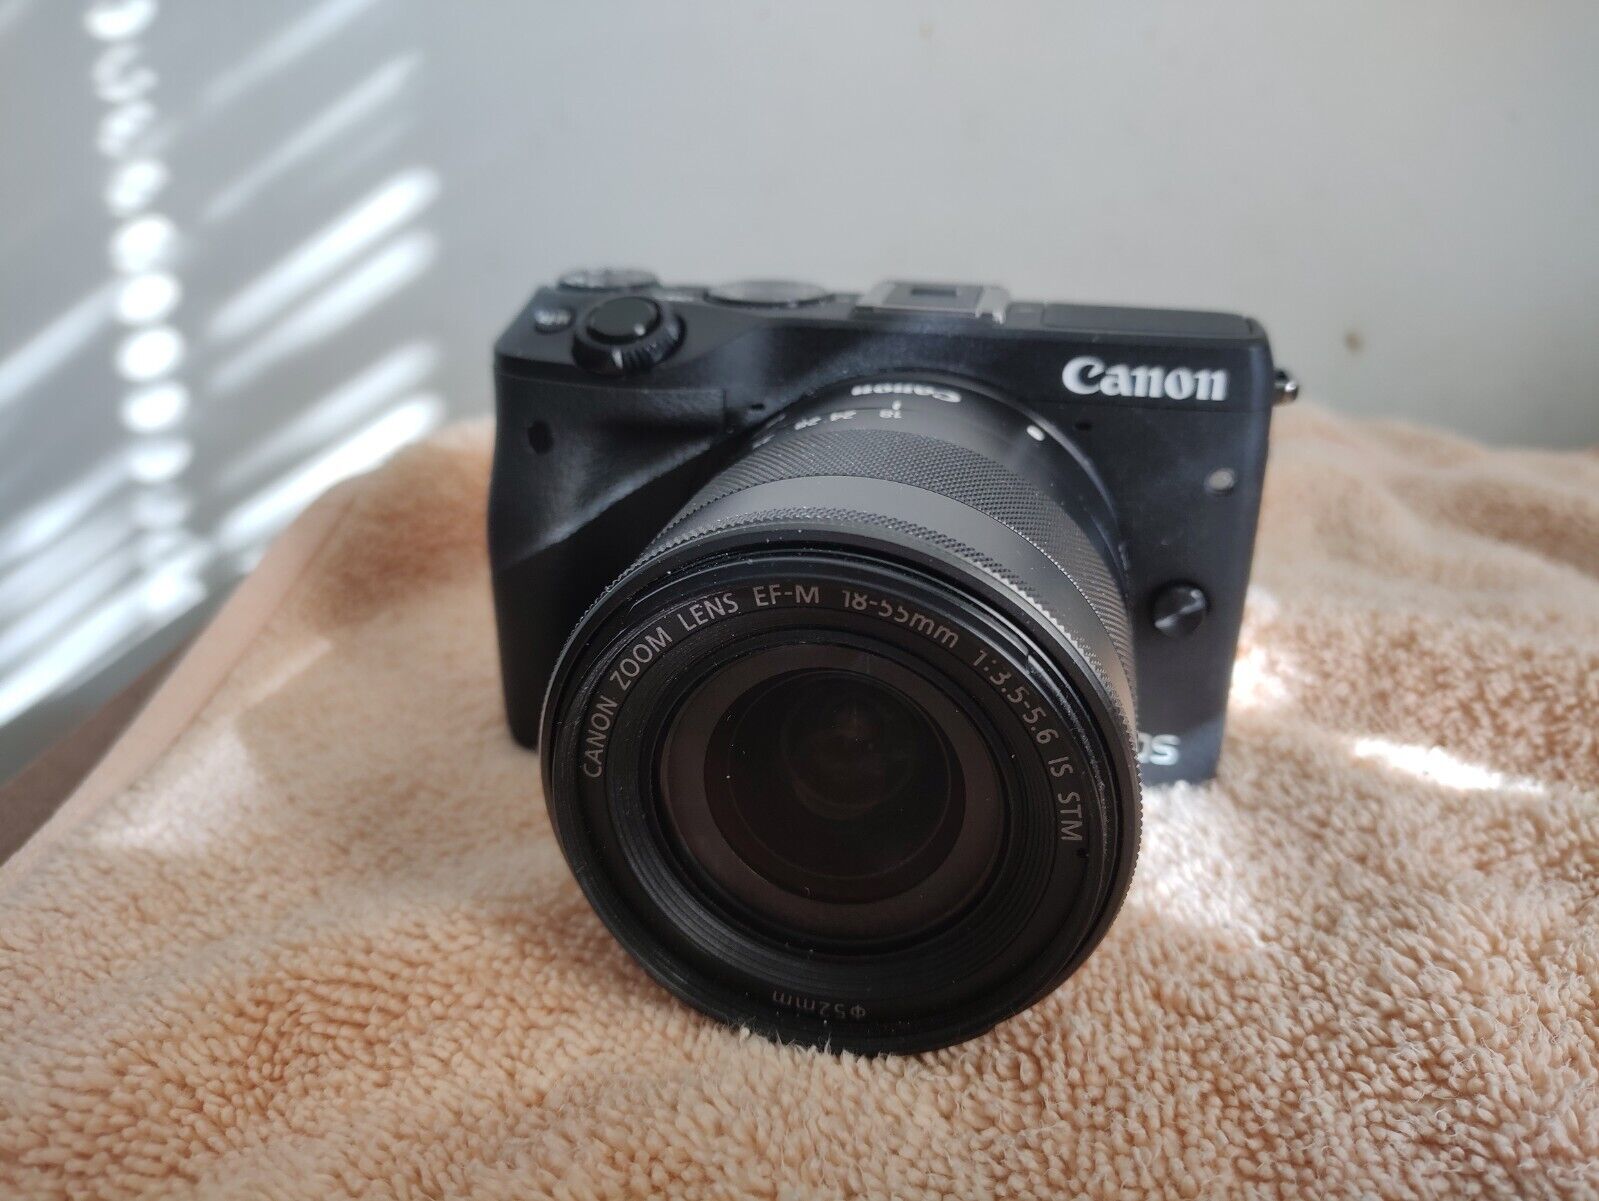 Canon EOS M3 24.2 MP Mirrorless Camera with 18-55mm Lens